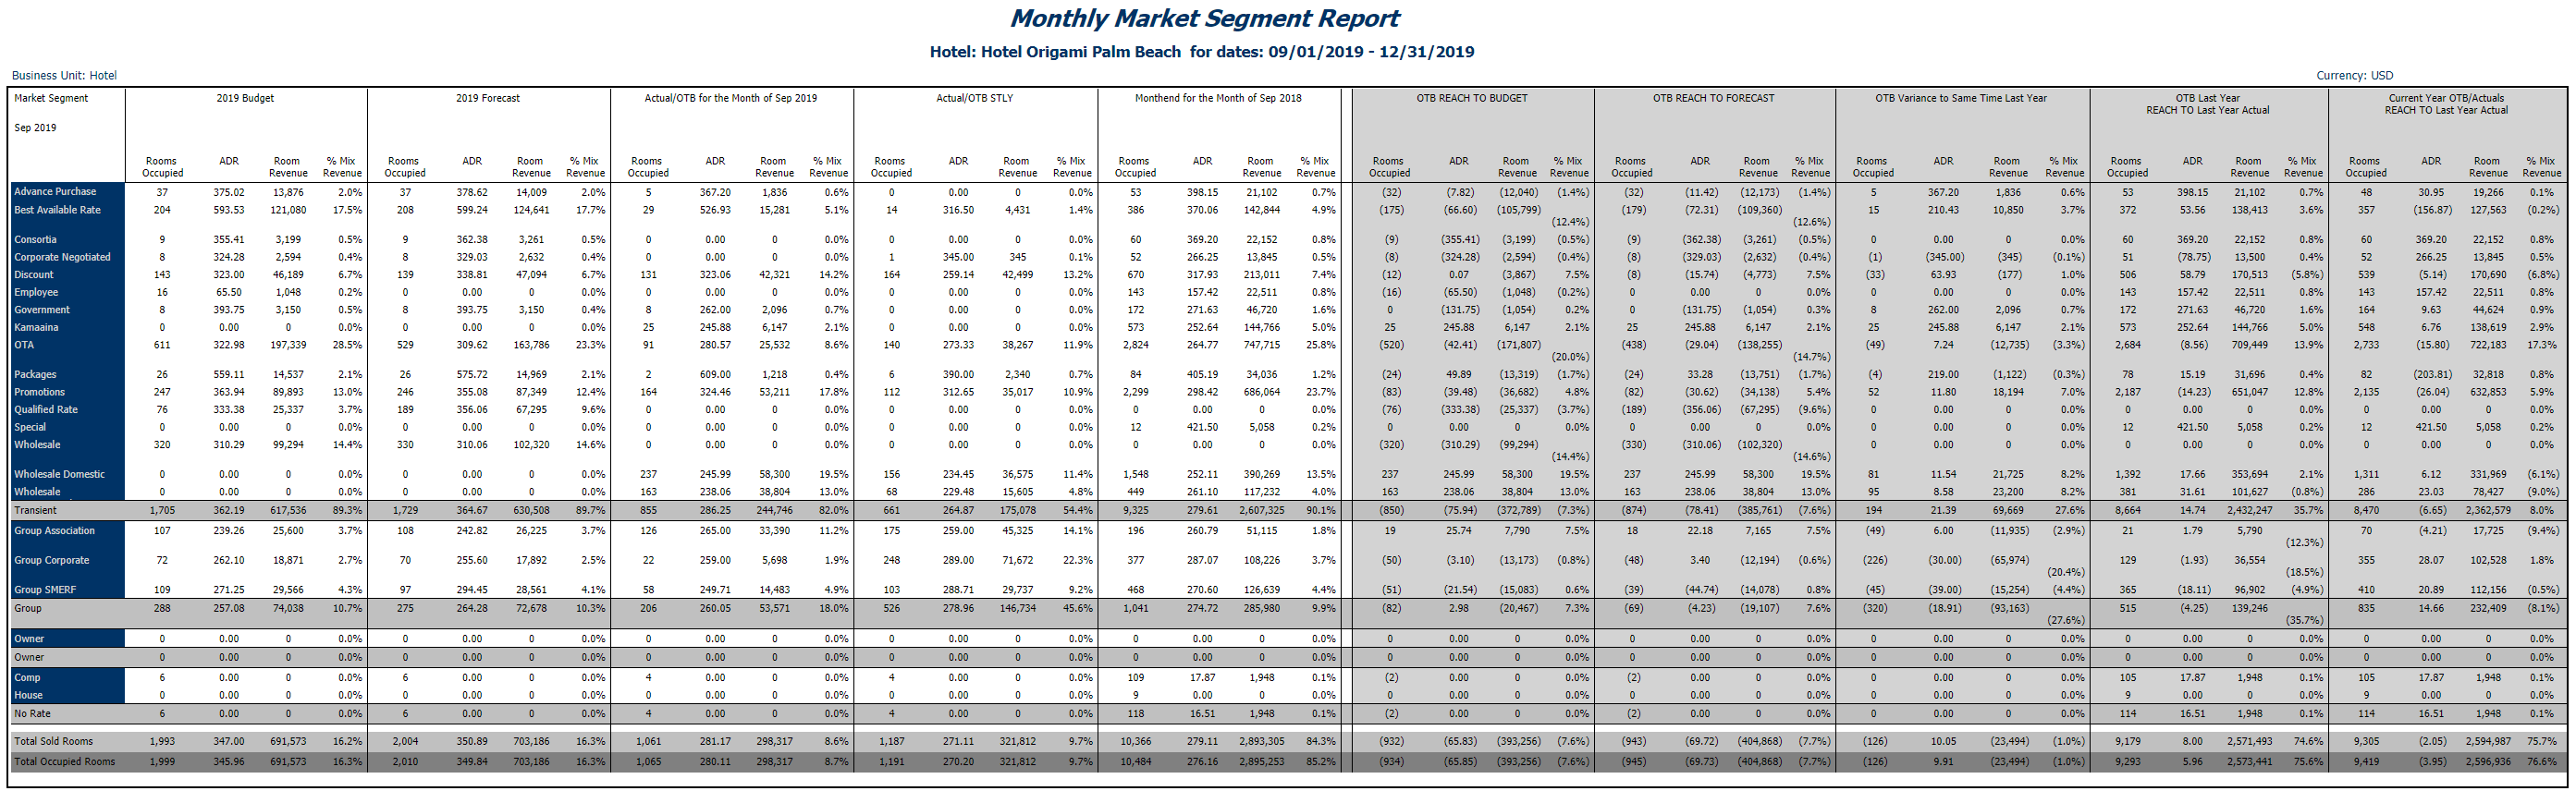 Release_Notes_Monthly_Market_Segment_Report_Page1.png